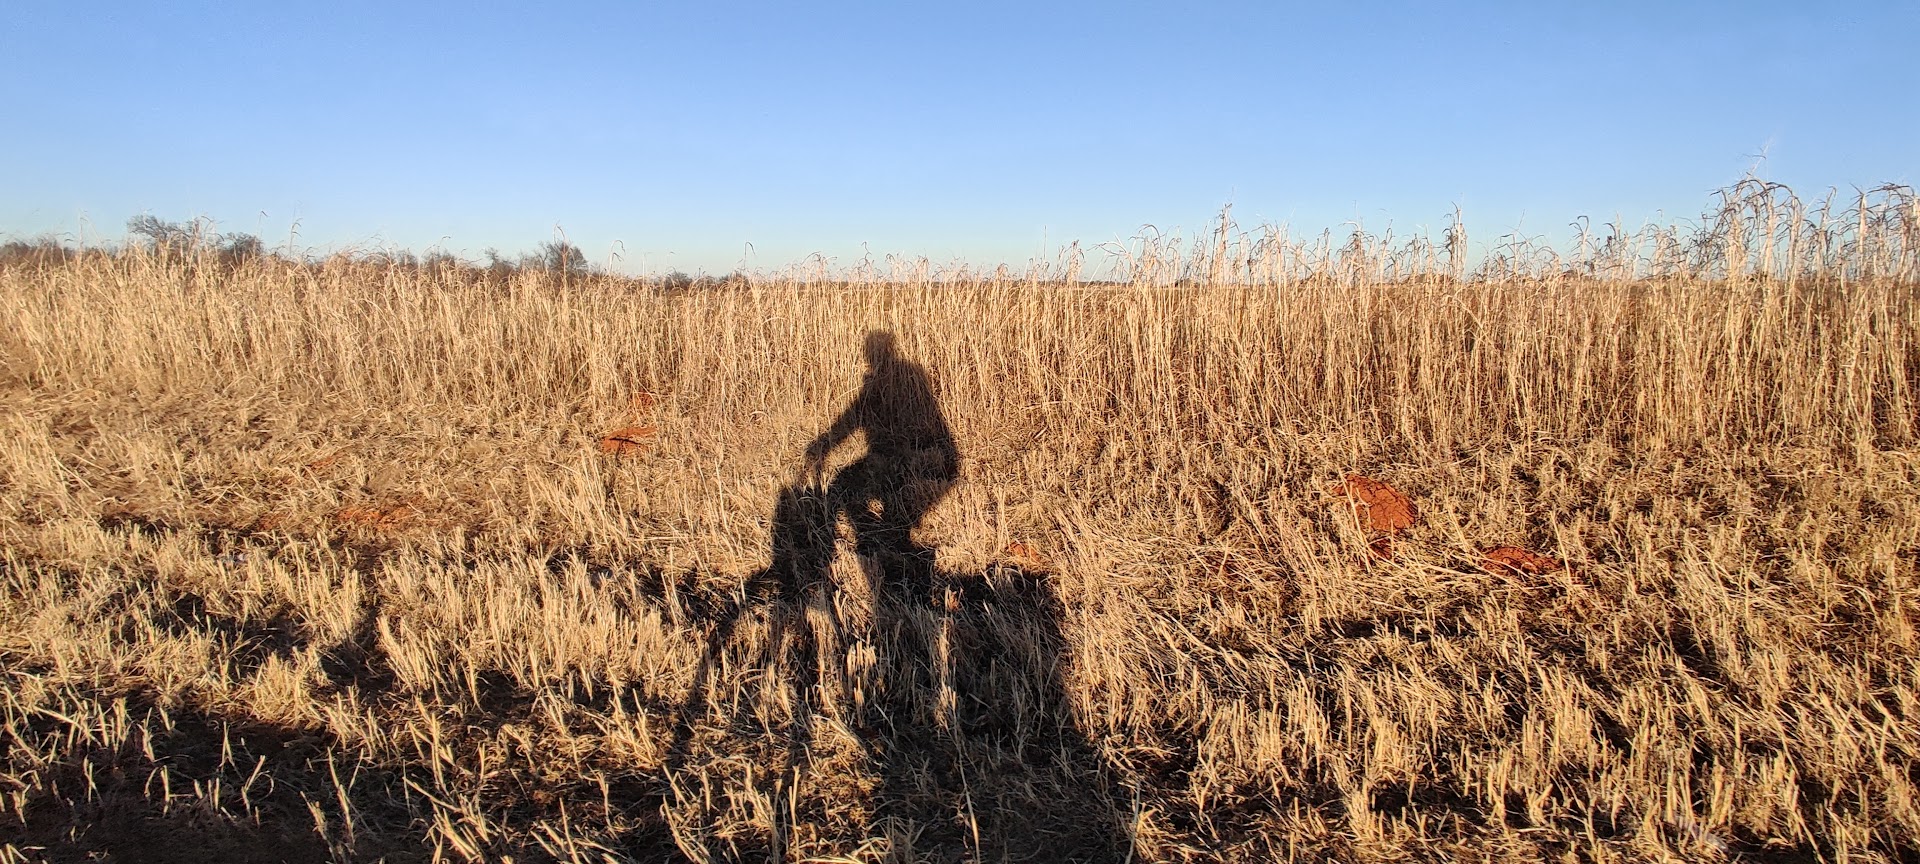 shadow of JMB riding a bike on a country road in Oklahoma